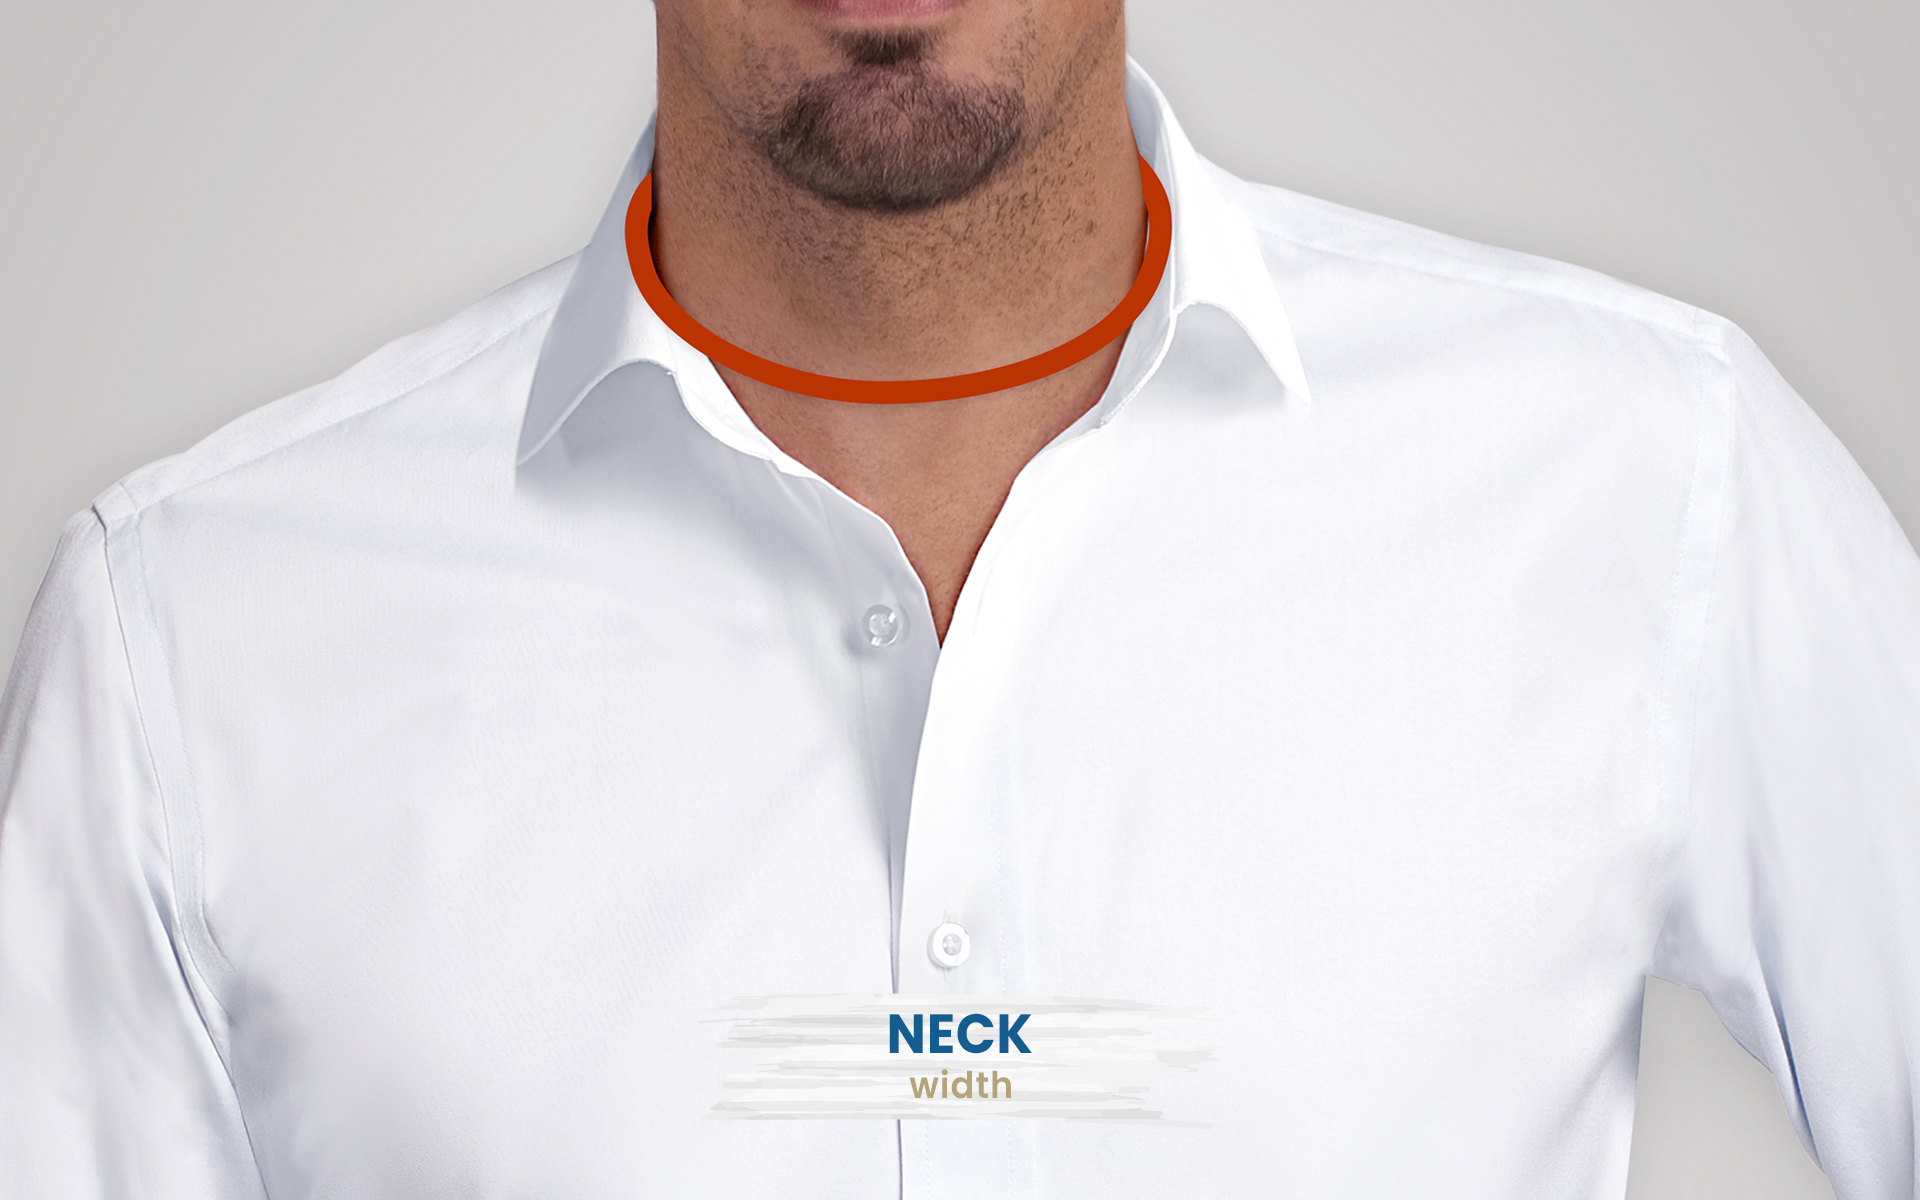 how to measure neck circumference